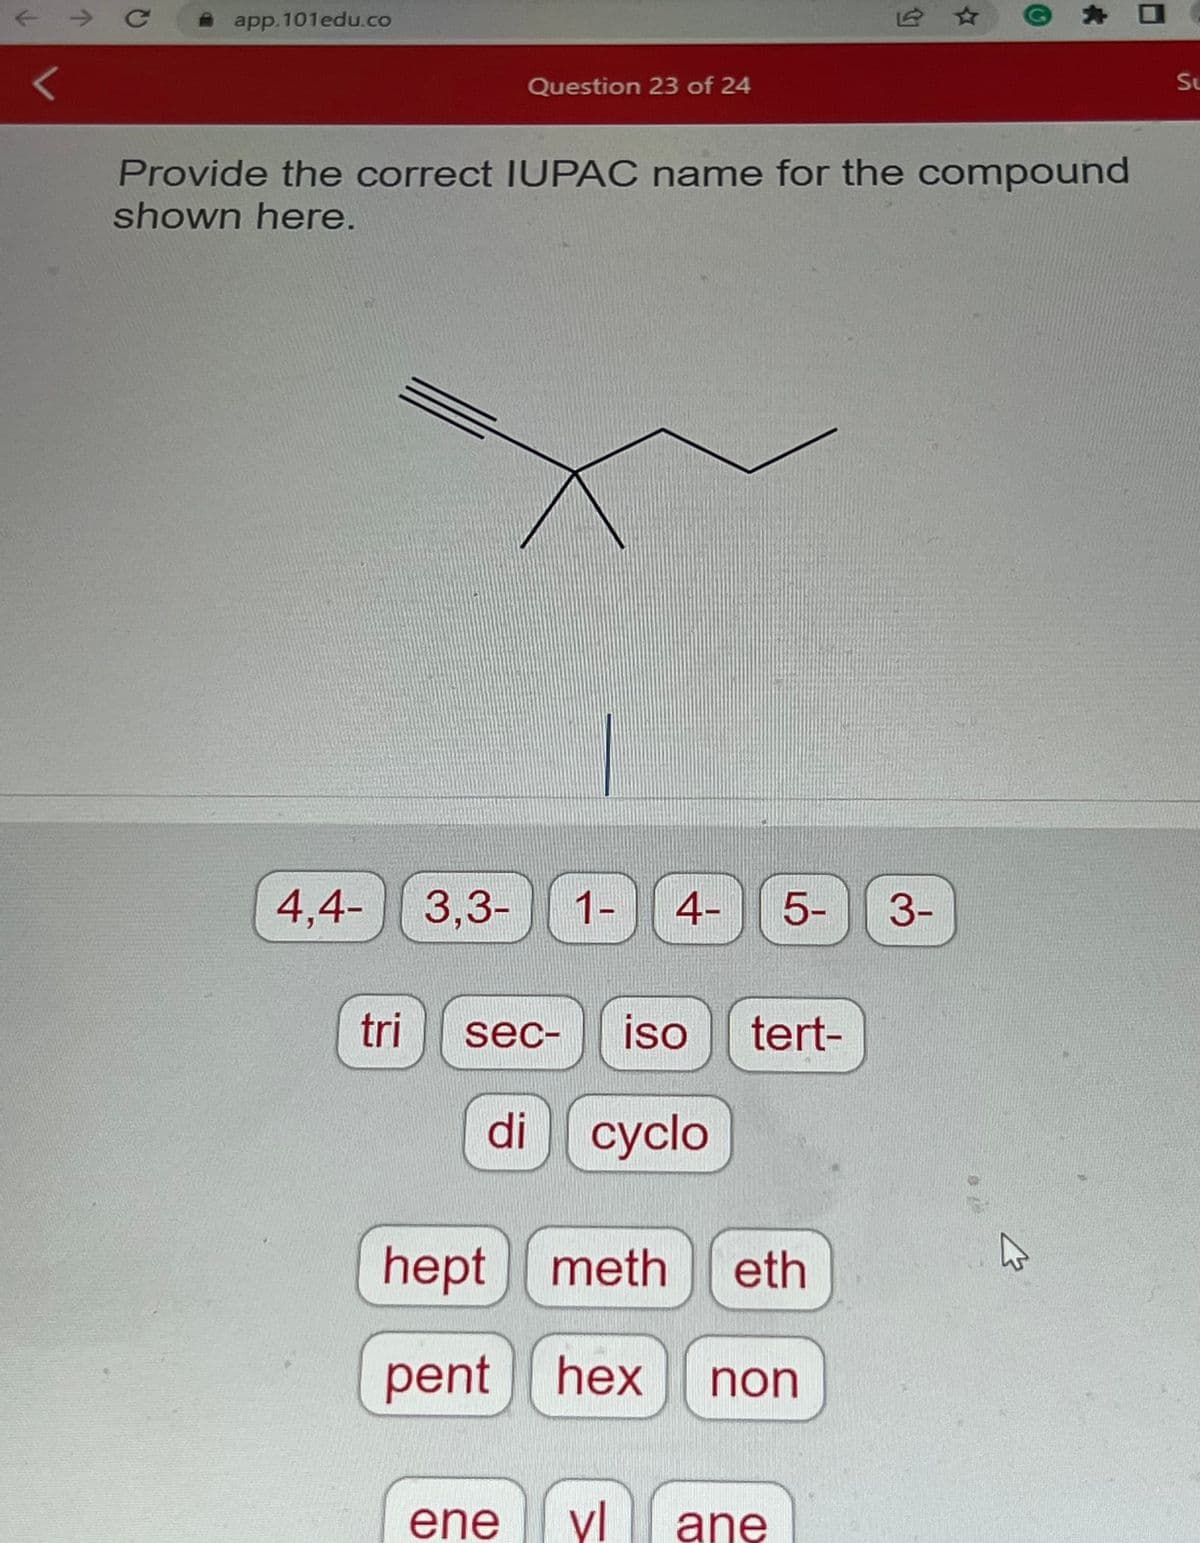 71
7
C
app.101edu.co
Provide the correct IUPAC name for the compound
shown here.
Question 23 of 24
4,4-3,3- 1- 4-
tri
sec- iso tert-
di cyclo
ene
5-
hept meth eth
pent hex
non
vl ane
3-
D
Su